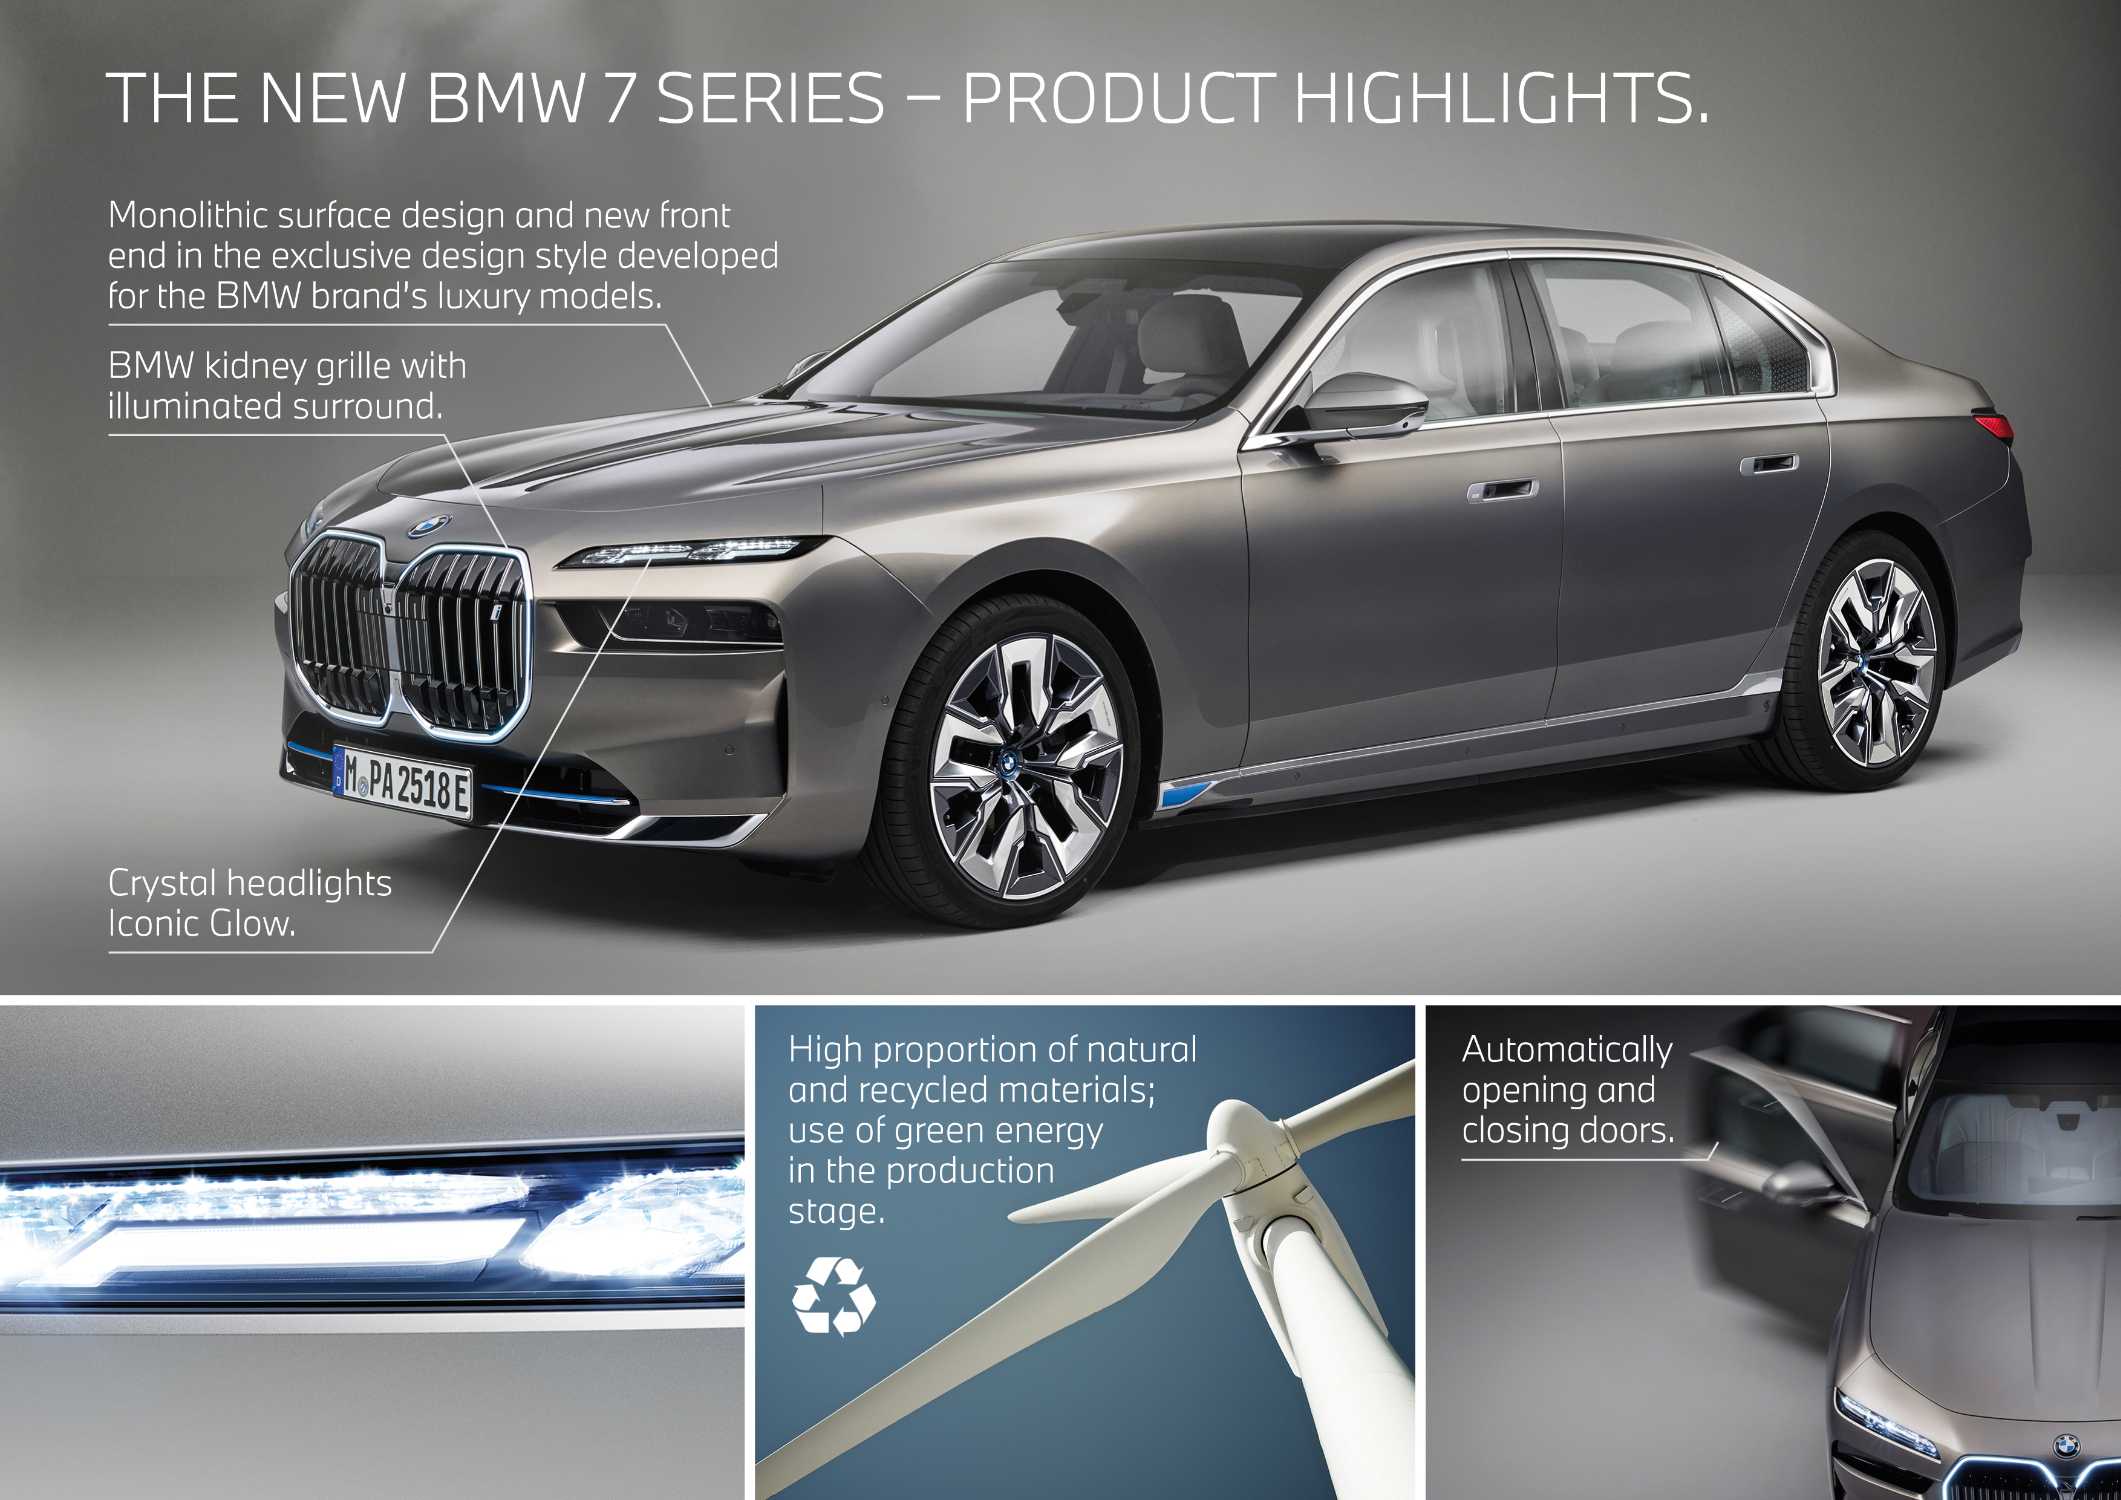 P90458915-the-new-bmw-7-series-highlights-04-2022-2121px